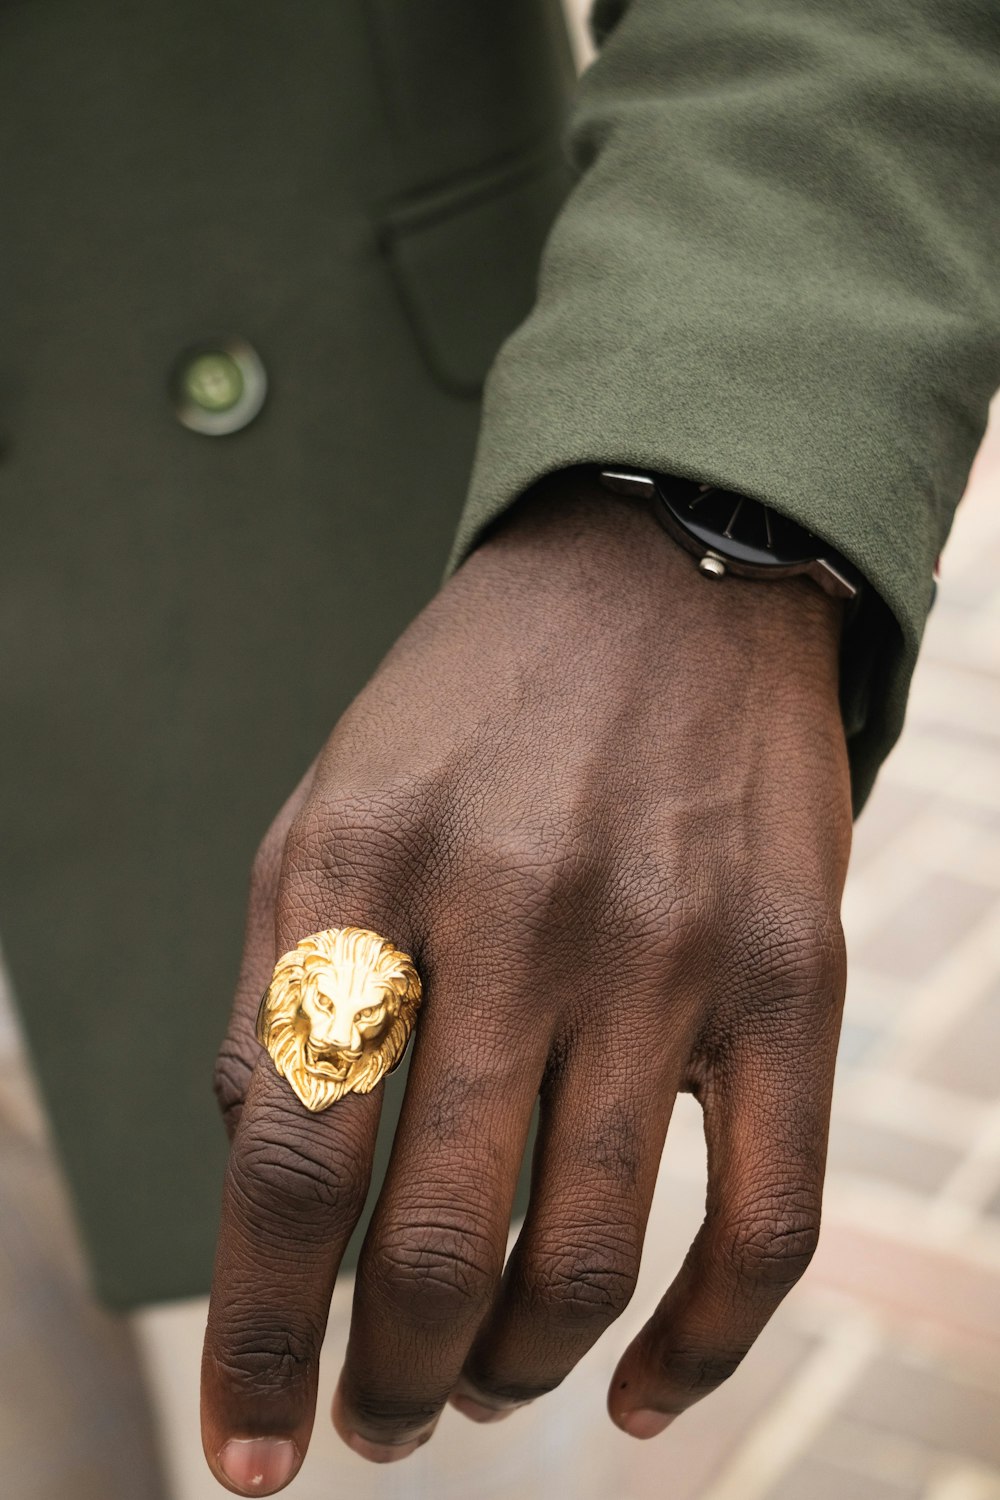 man wearing gold-colored lion ring